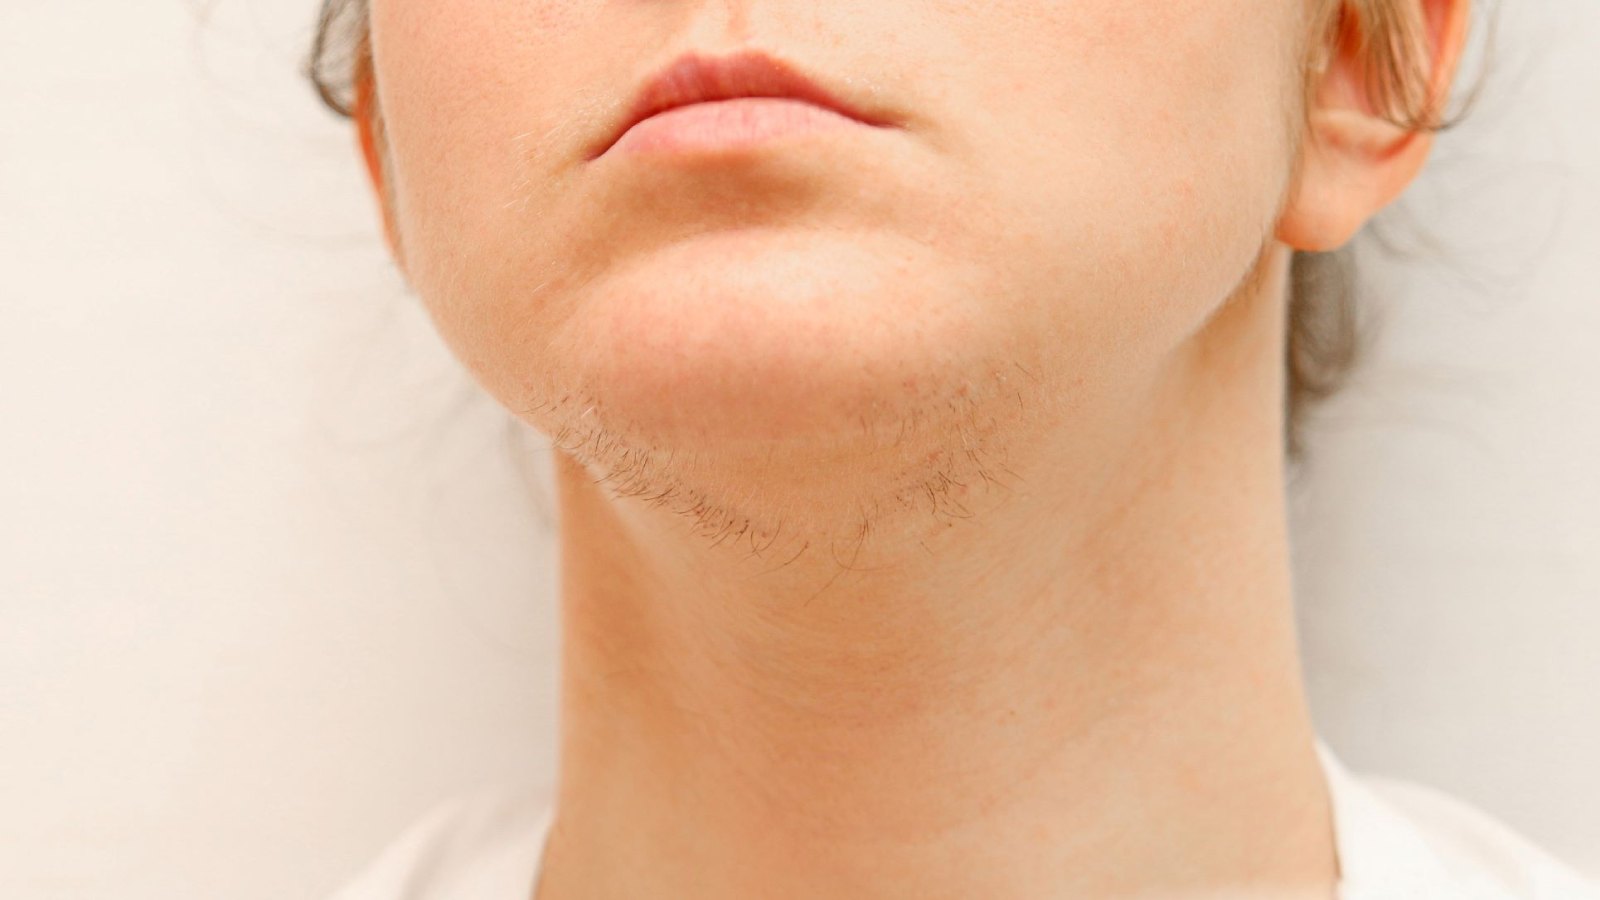 Common Places Where the Vellus Hairs Grow